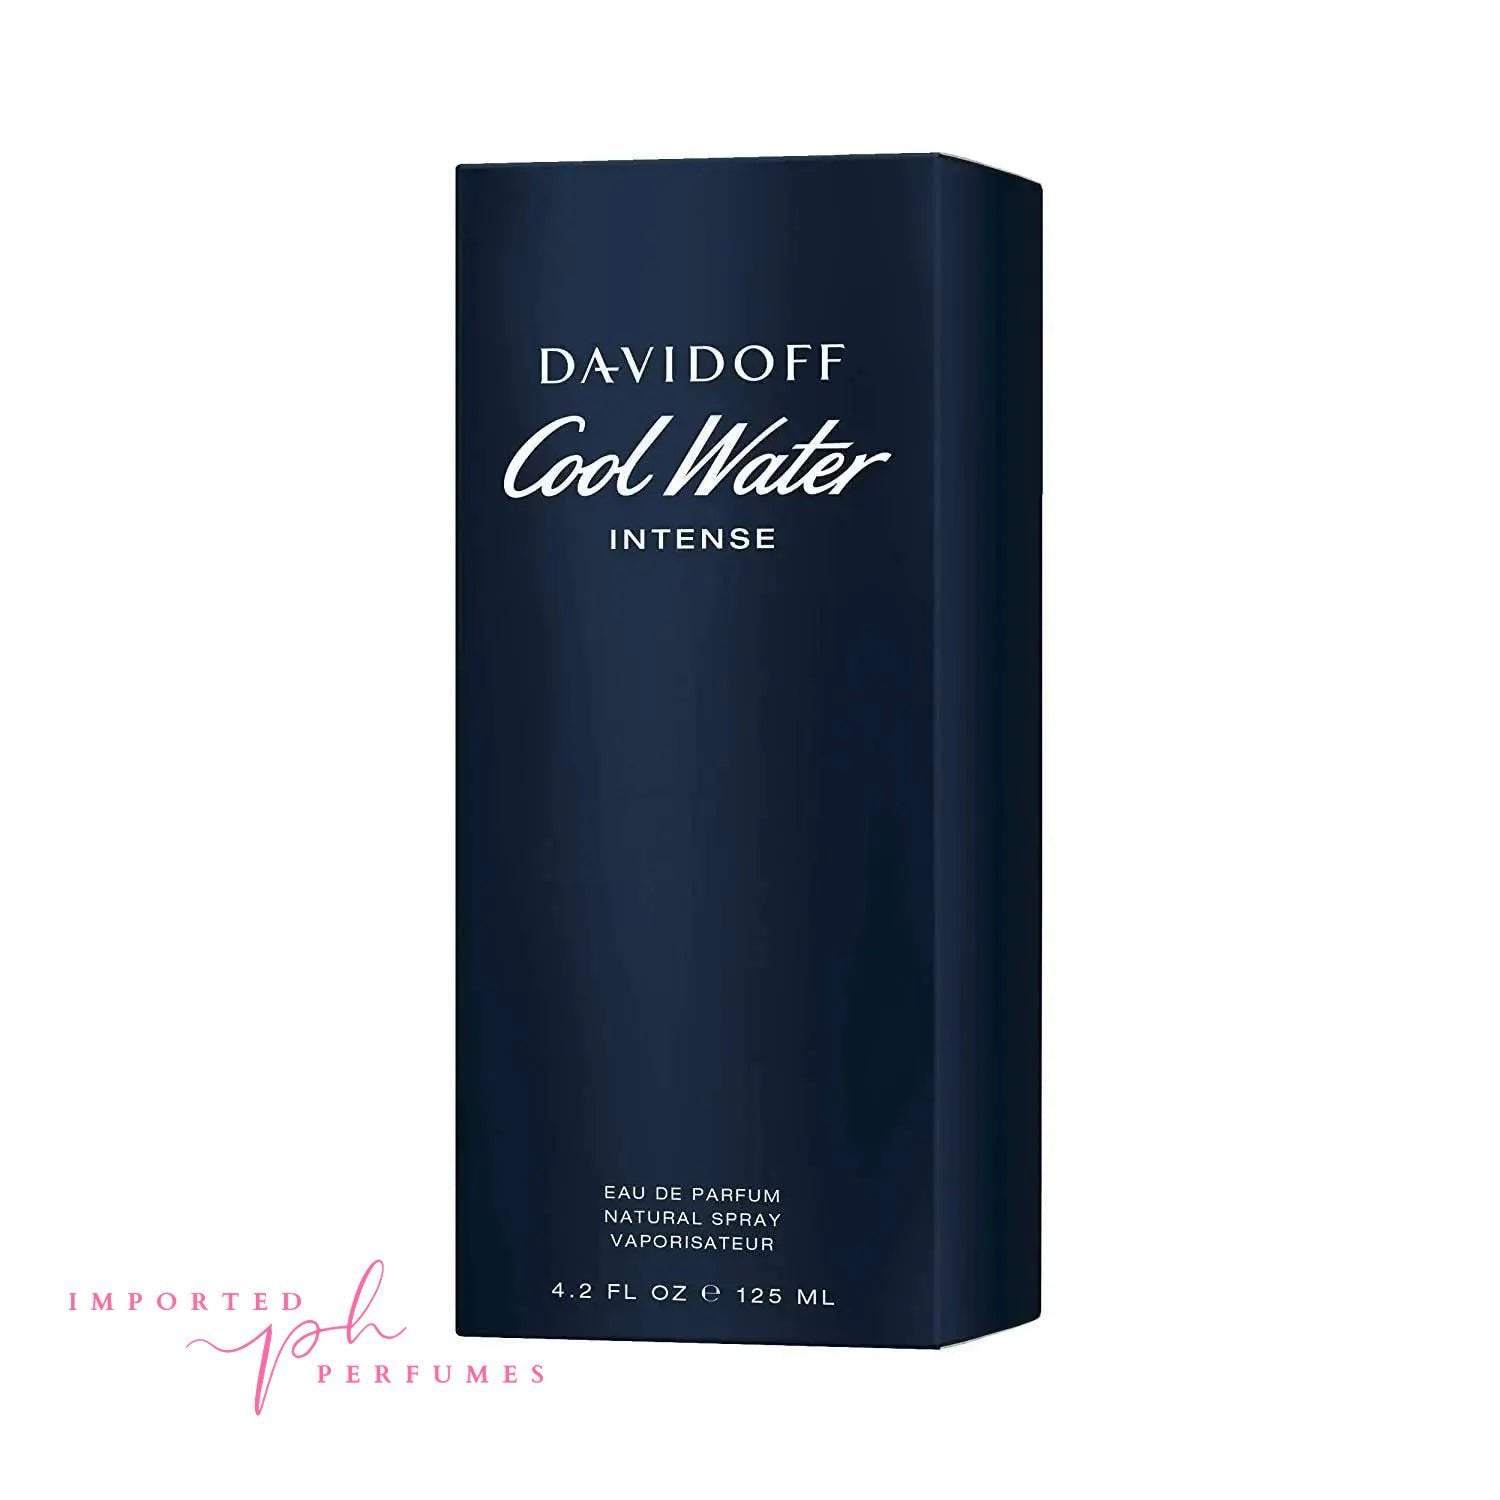 [TESTER] Cool Water Intense by Davidoff for Men Eau de Parfum 125ml-Imported Perfumes Co-cool water intense,Cool water men,david,Davidoff,men,test,TESTER